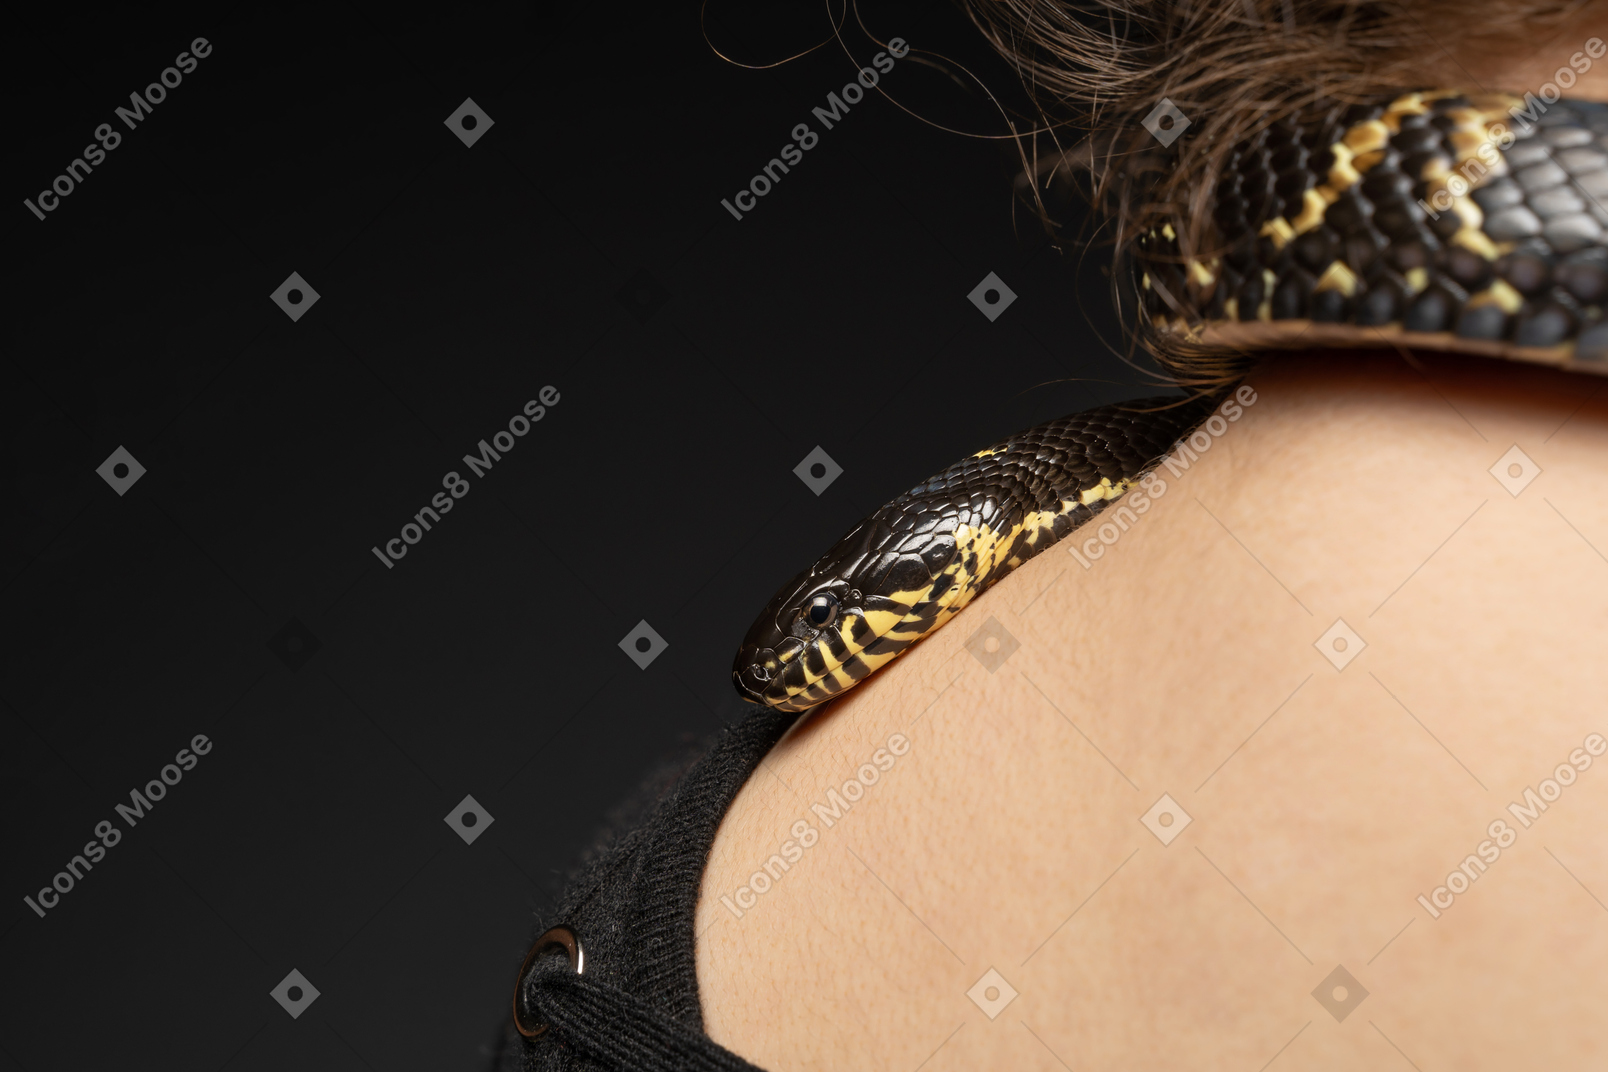 Black striped snake curving around young woman's neck